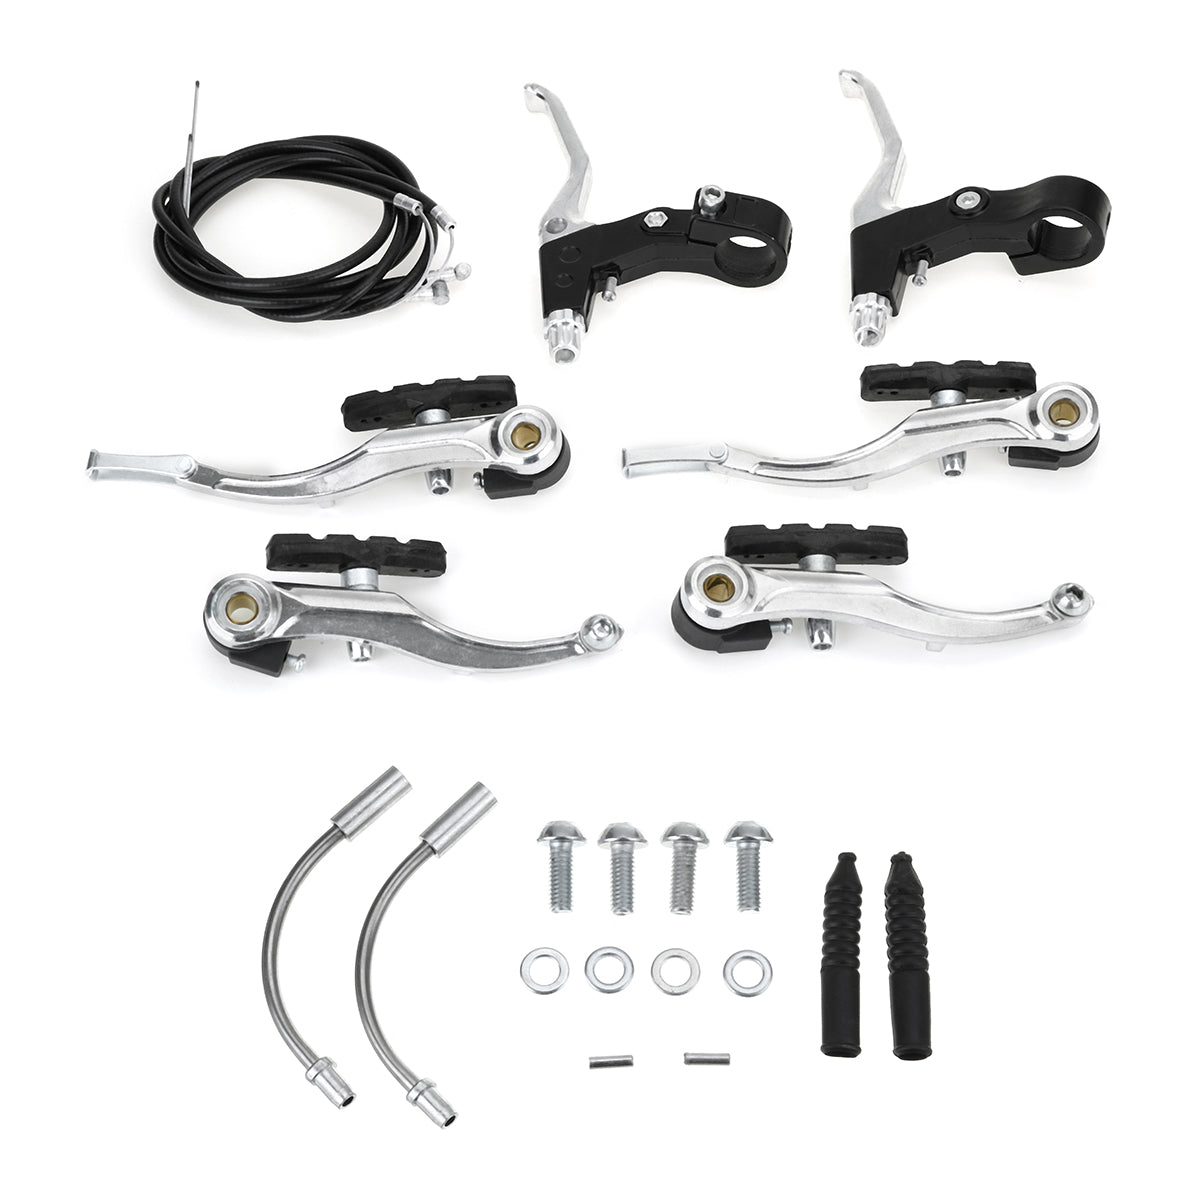 White Smoke Complete Bicycle V-Brake Calipers Cables Levers Set Fittings MTB ATB Hybrid Bike